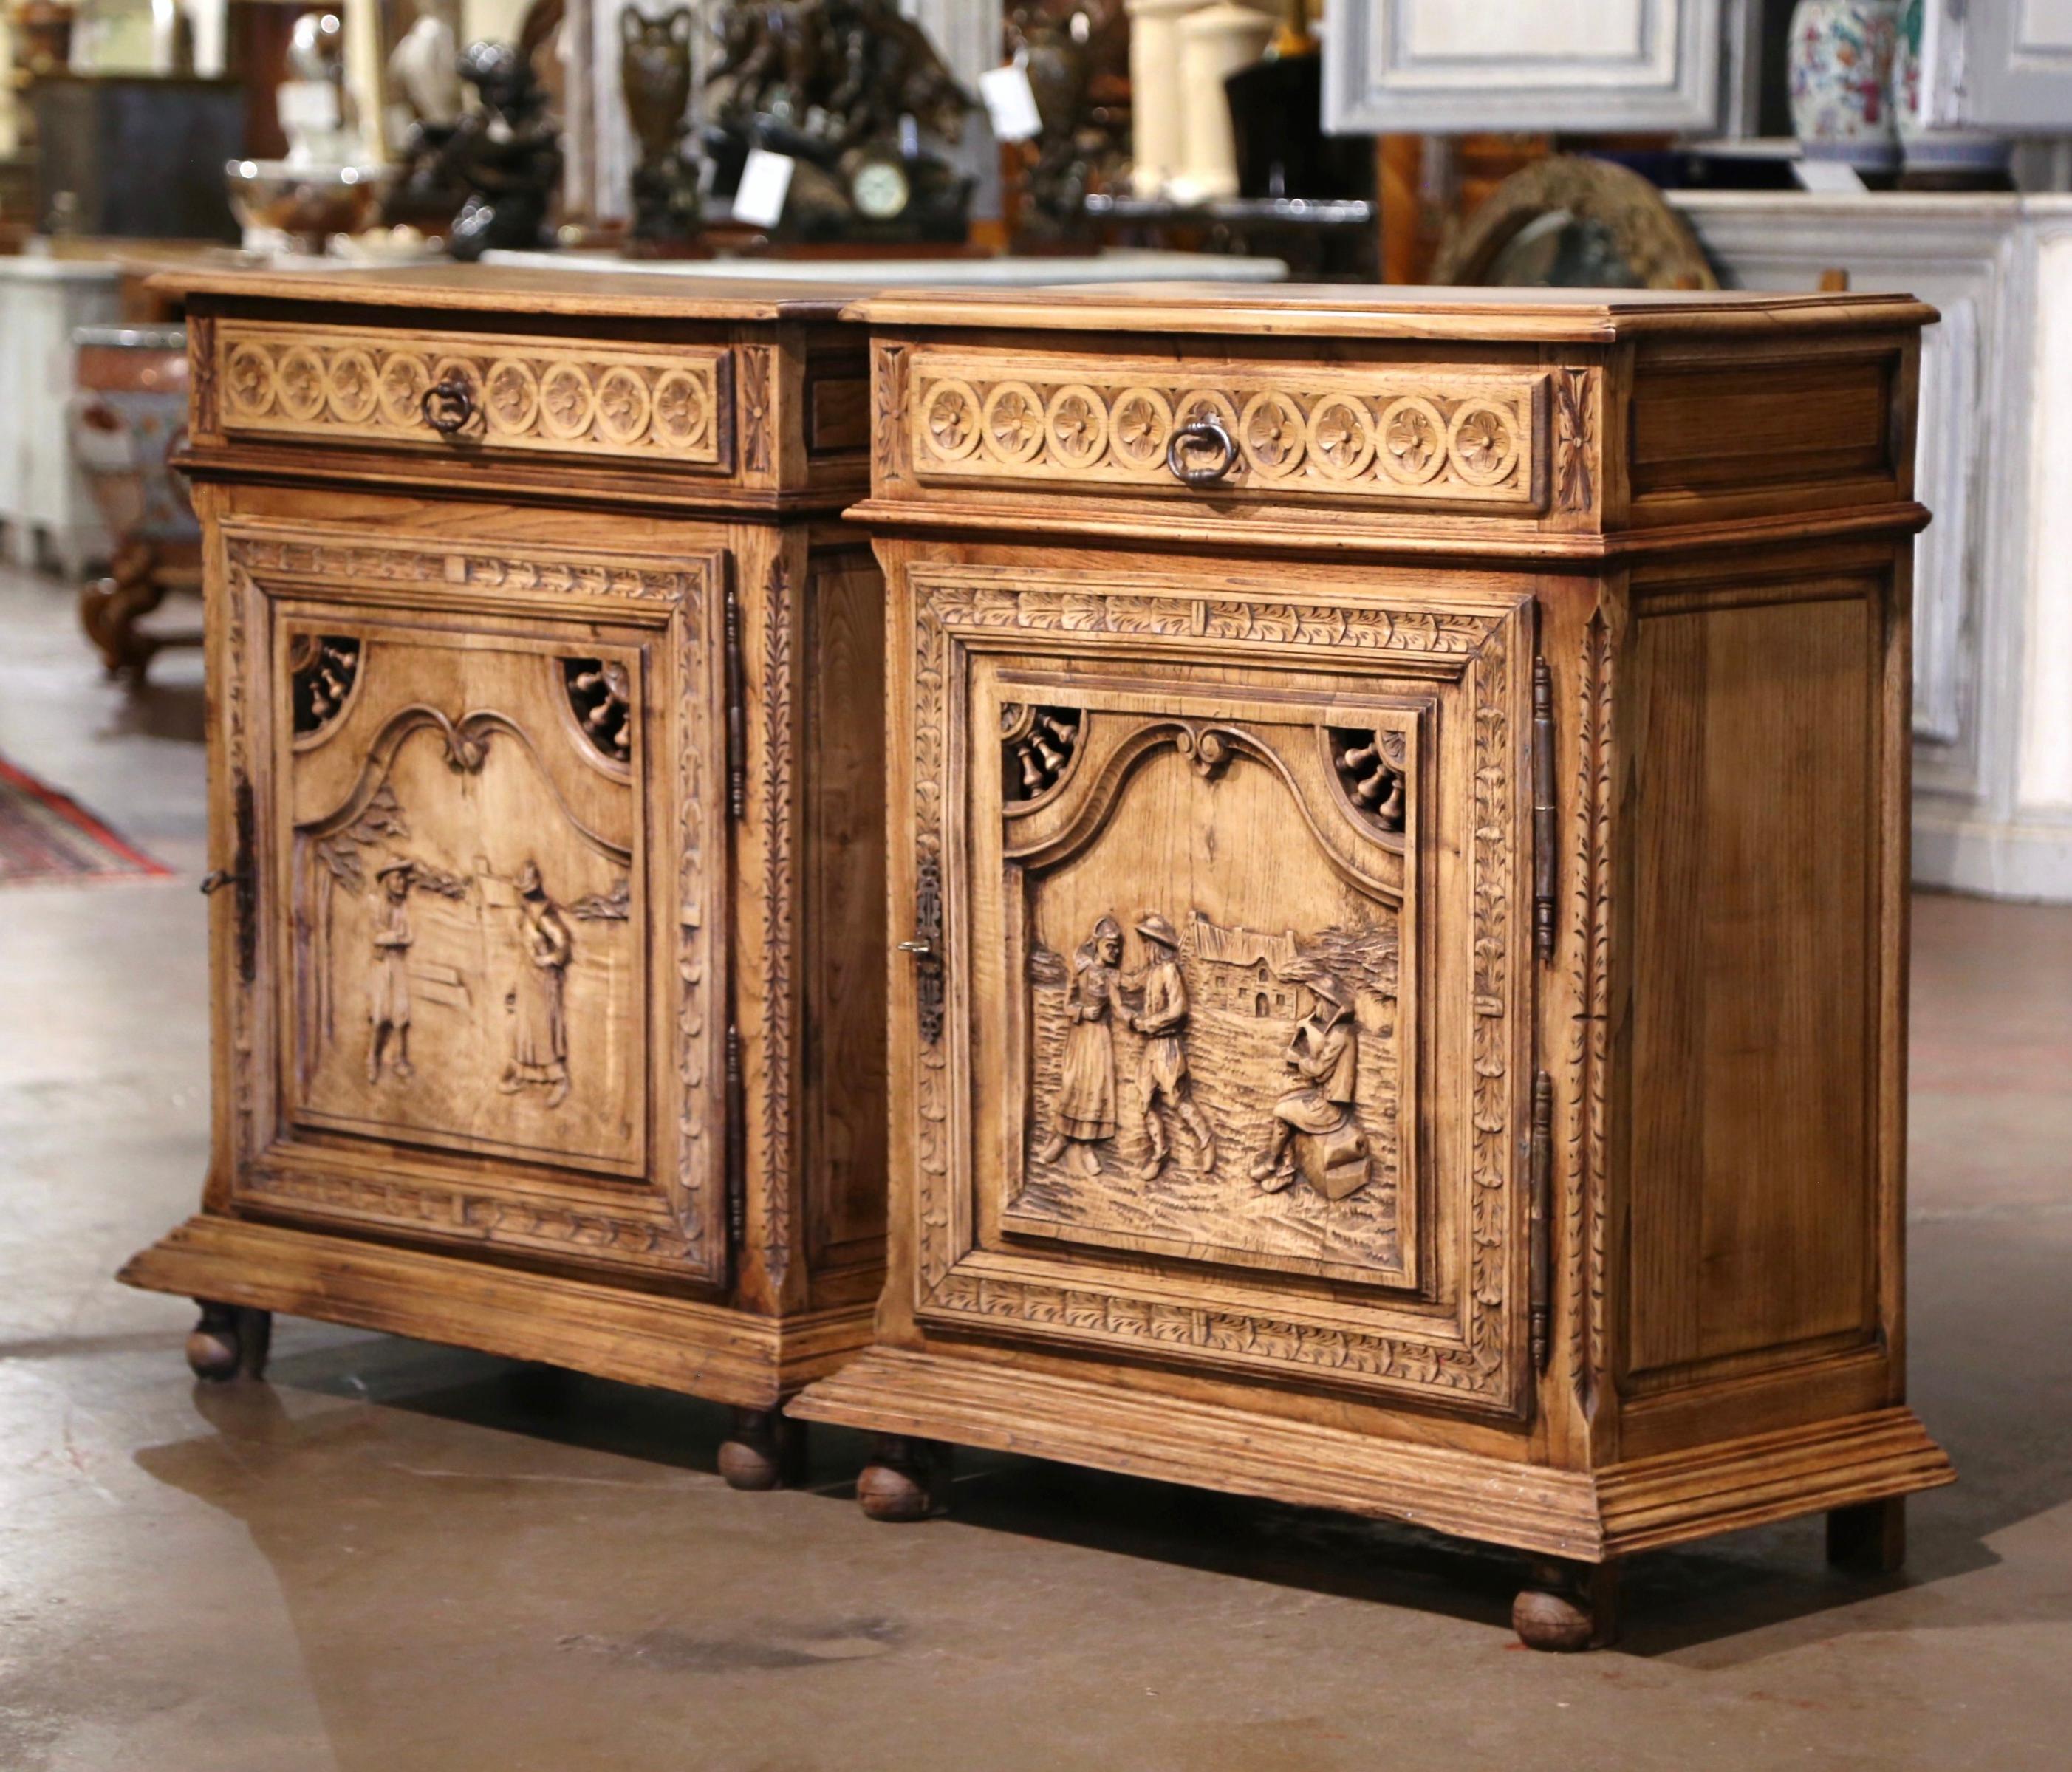 Decorate an entry way, a den or an office with these elegant antique jelly cabinets. Crafted in Brittany France, circa 1870, and built of oak and chestnut, the 